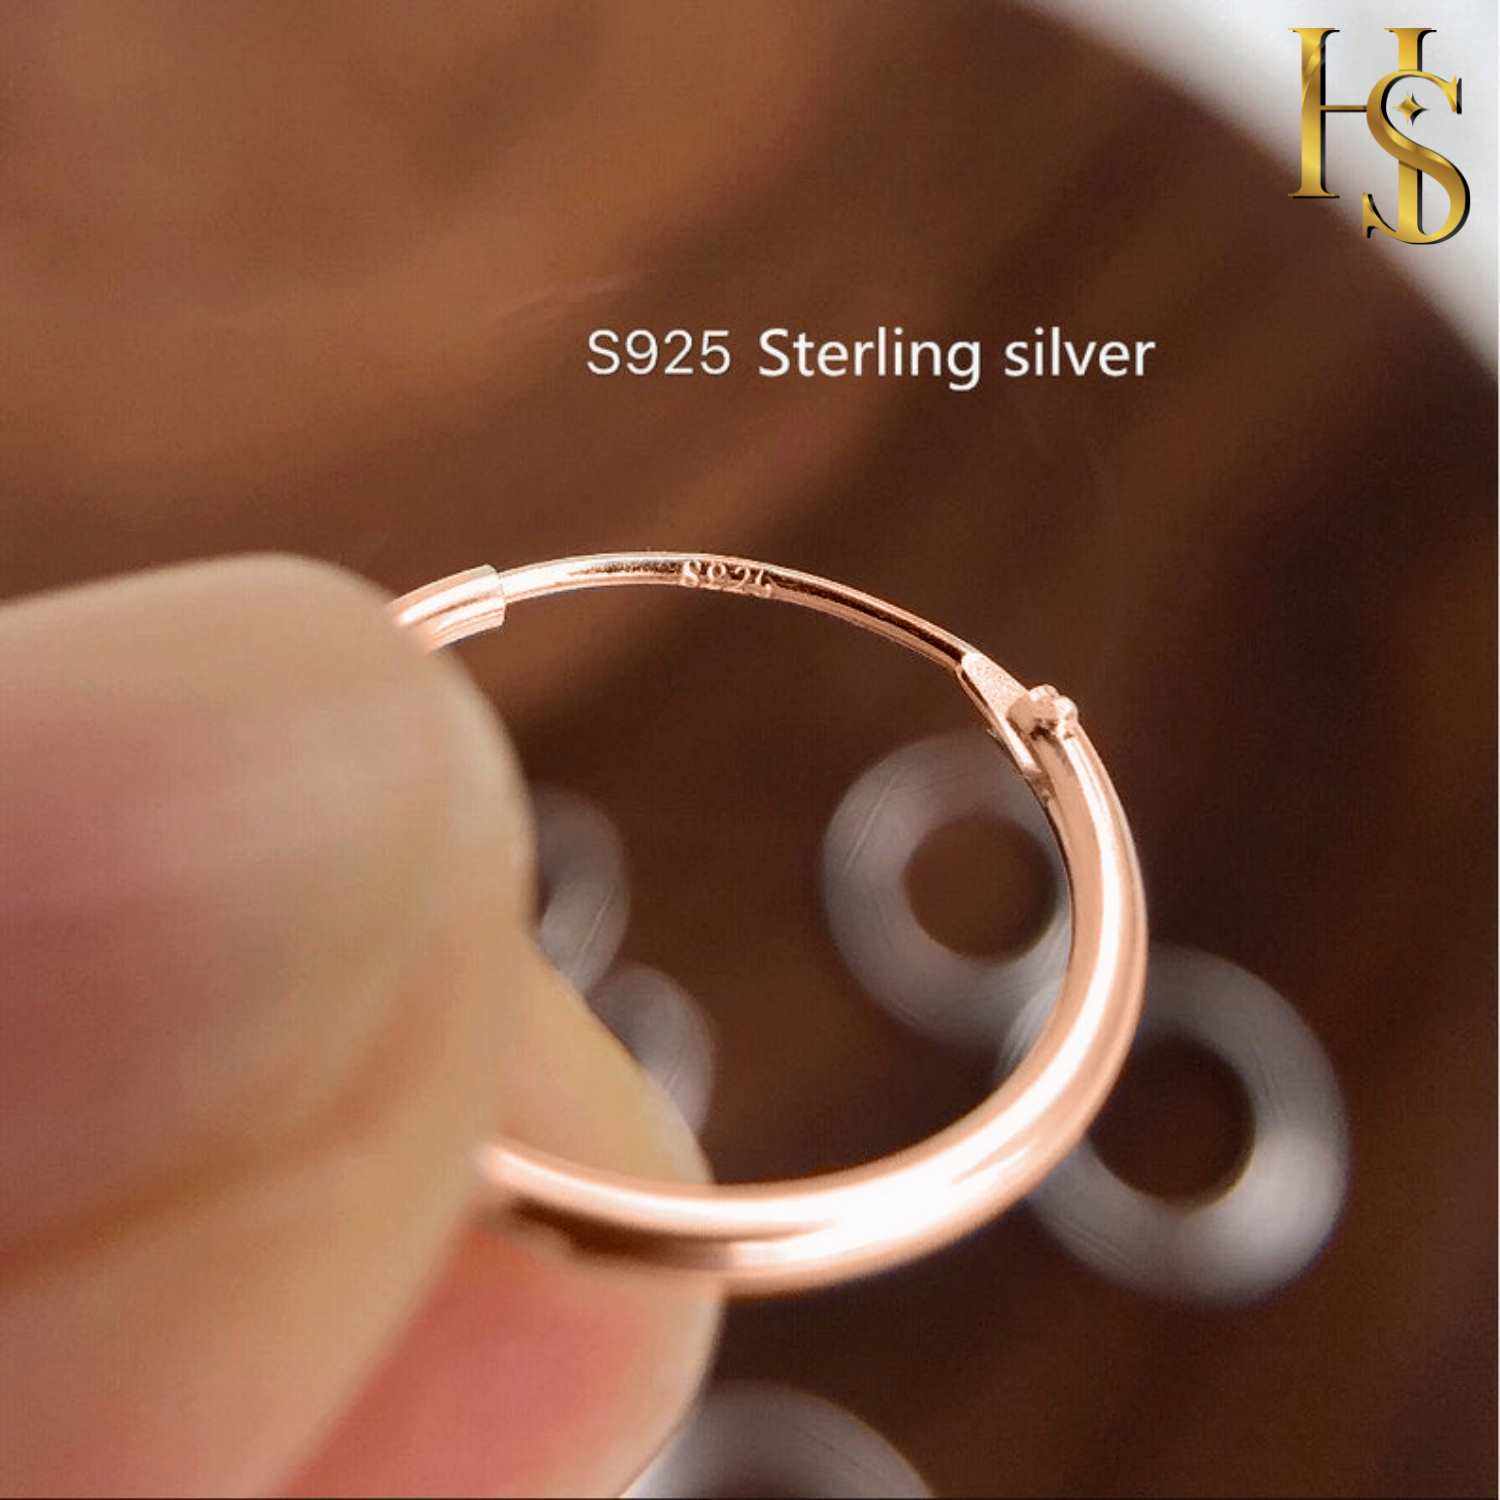 Classic Rose Gold Hoop Earrings in 92.5 Silver - 1.2mm Thickness - Big Sizes 25mm to 50mm -  18K Rose Gold finish